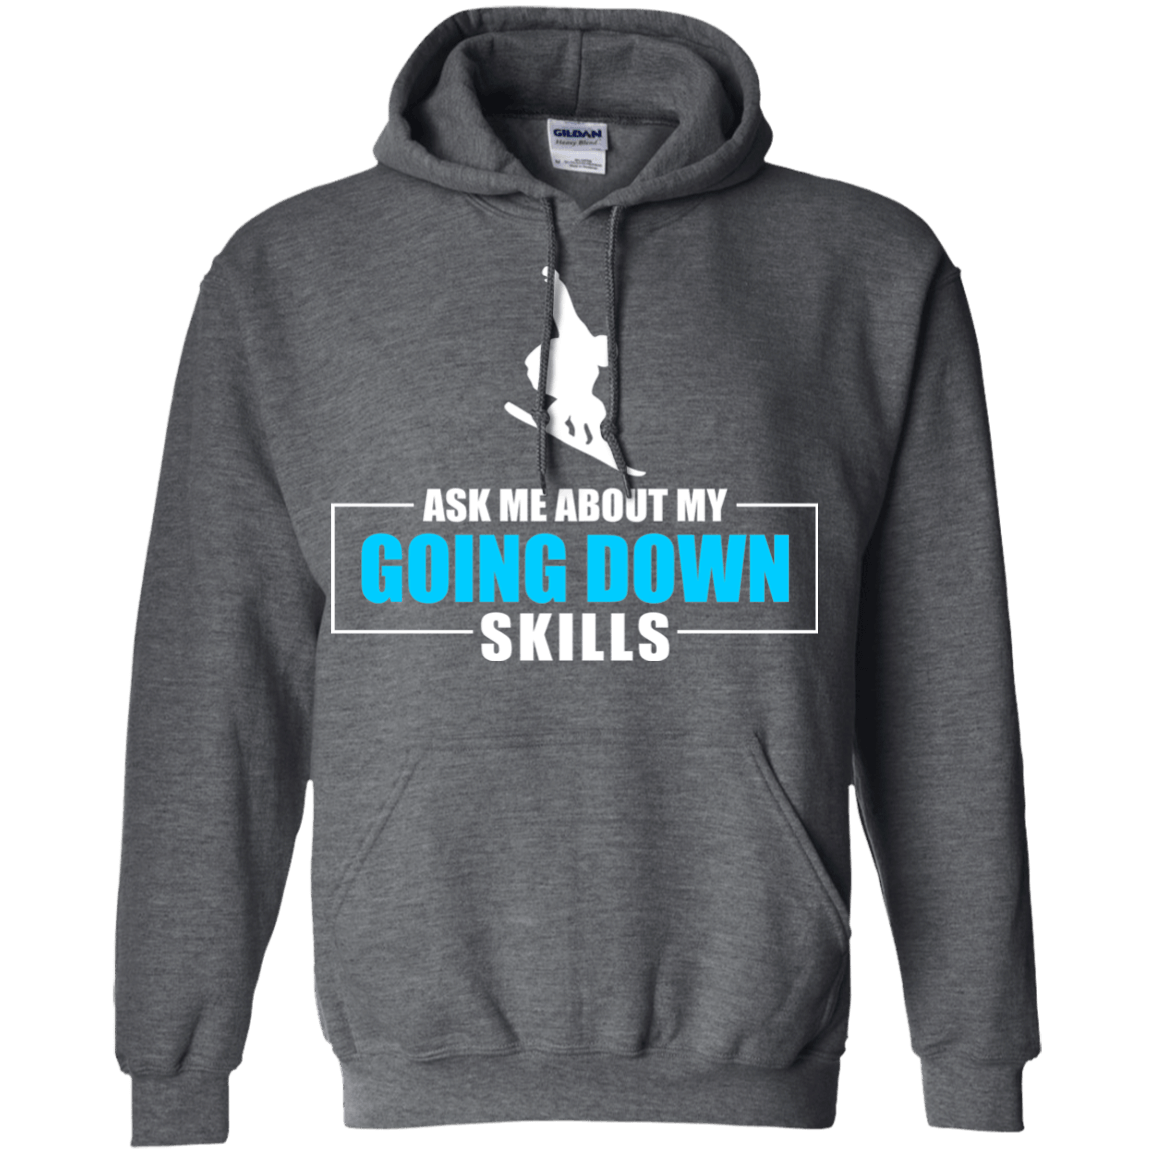 Ask Me About My Going Down Skills - Snowboard Hoodies - Powderaddicts